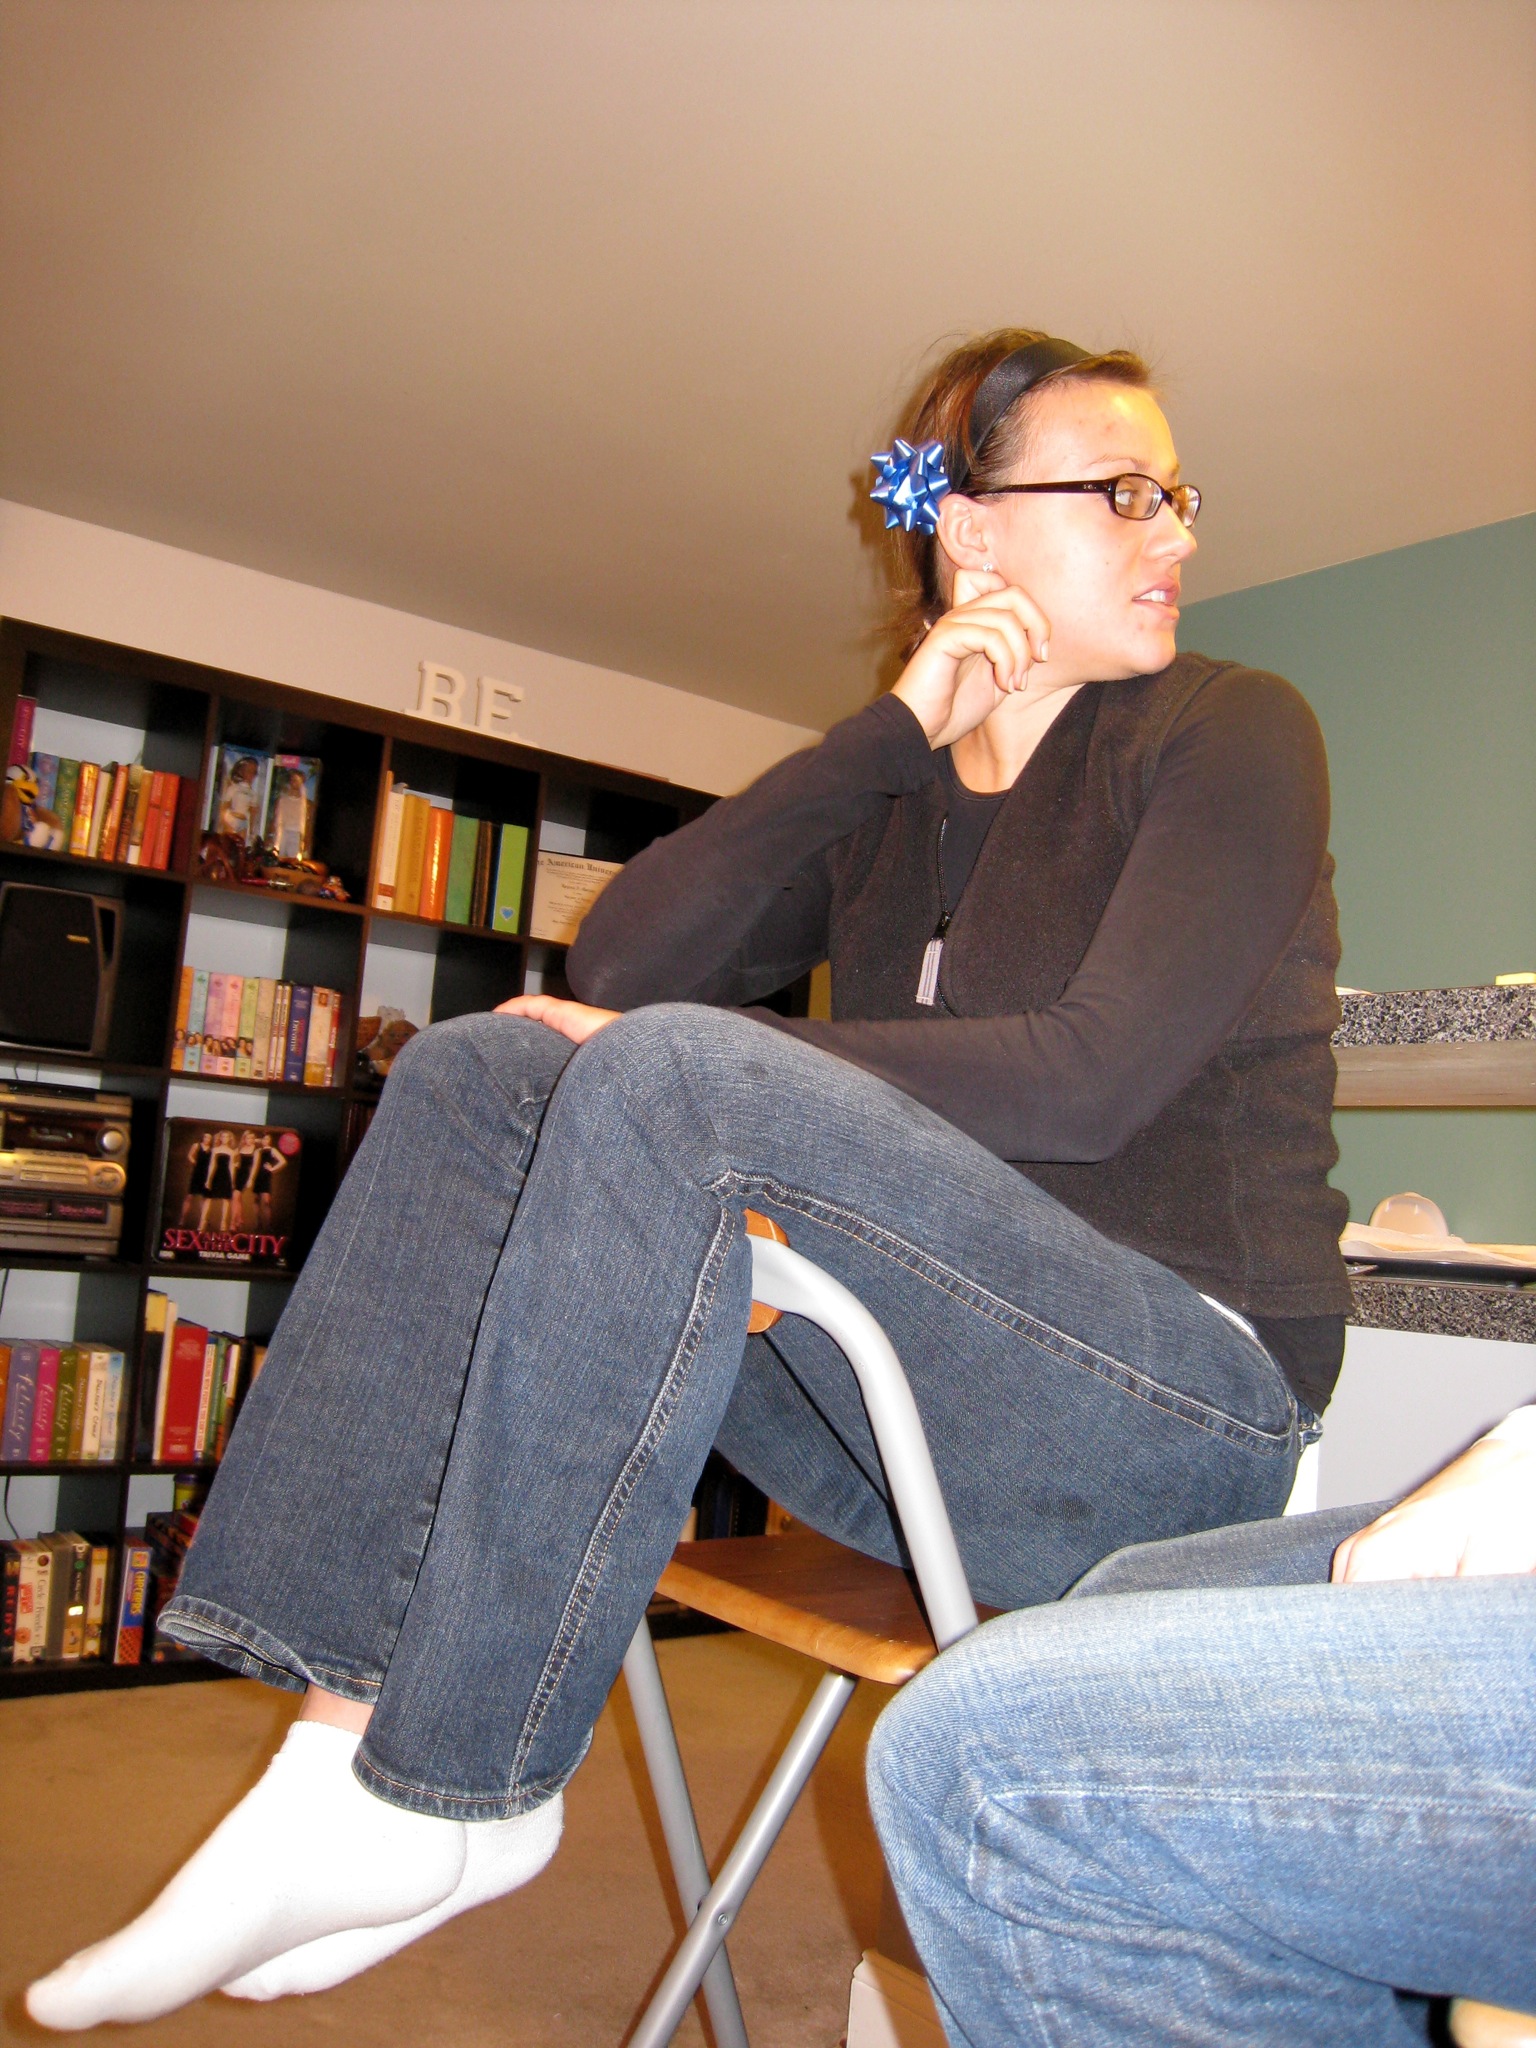 a woman wearing jeans and shoes, sitting on a stool